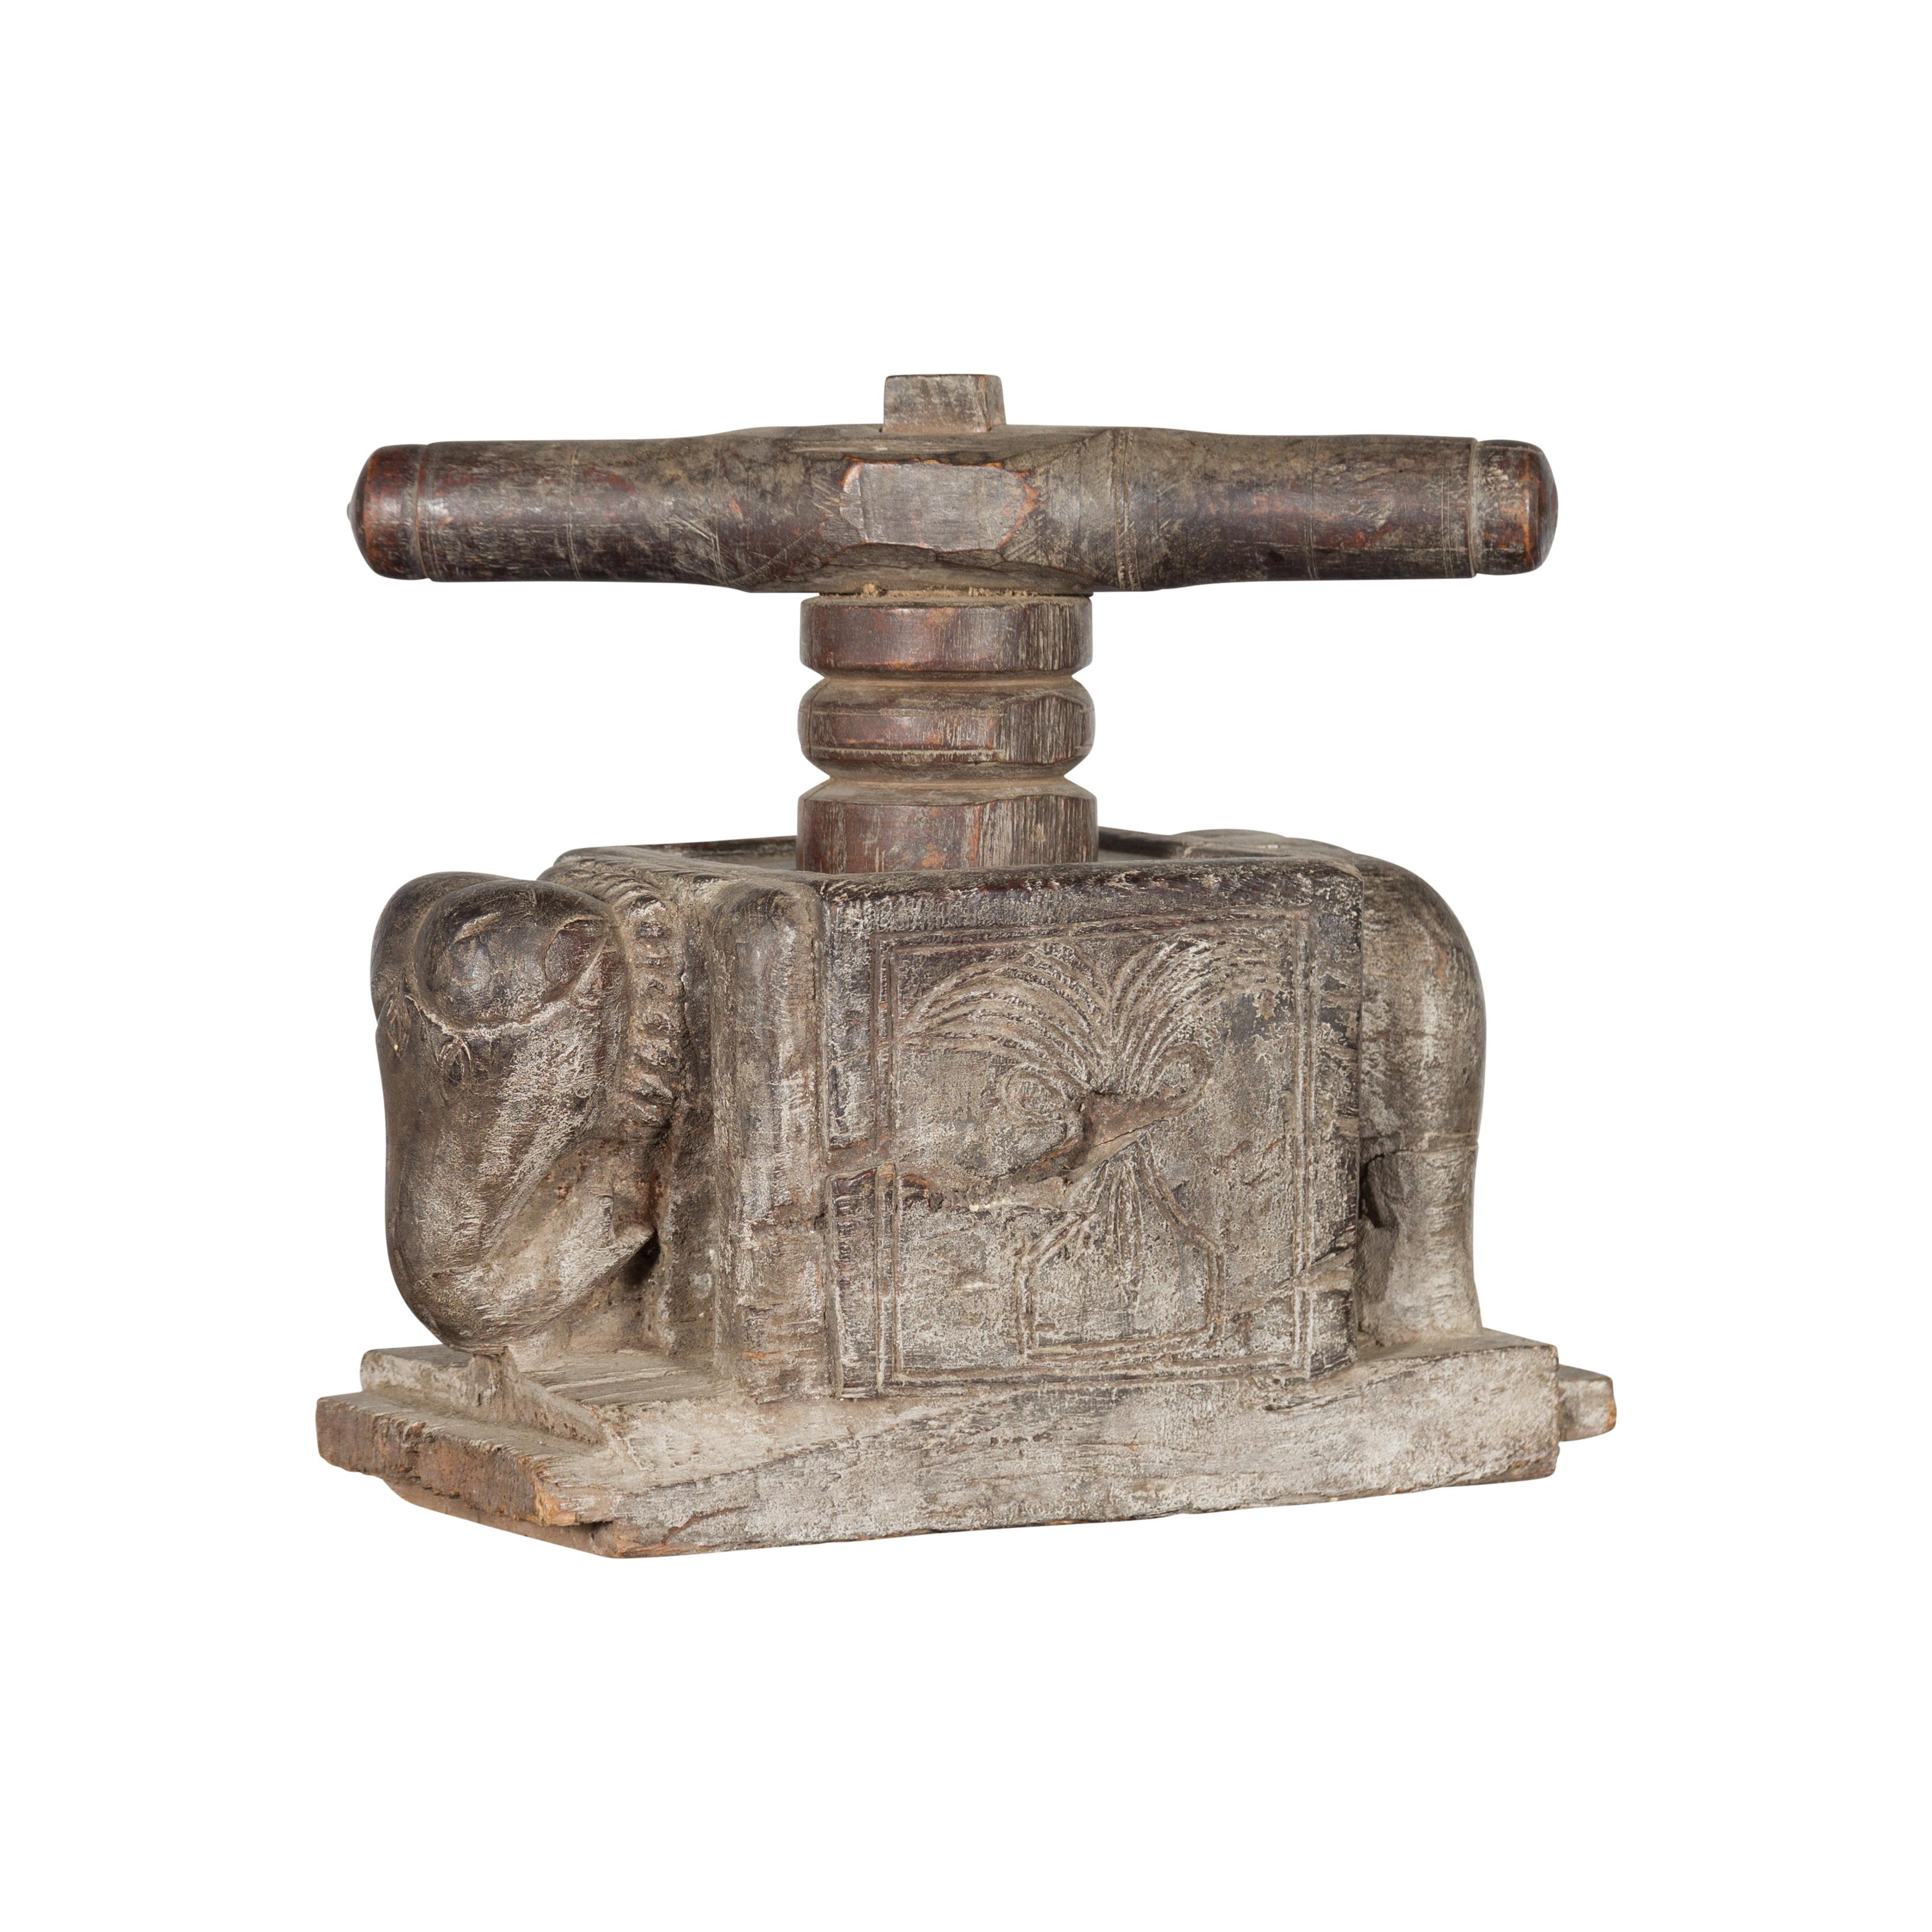 An Indian antique carved wooden hand noodle press from the 19th century, with elephant motif. Created in India during the 19th century, this wooden piece was originally used to hand make noodles. Showcasing a vice press, the body is adorned with a